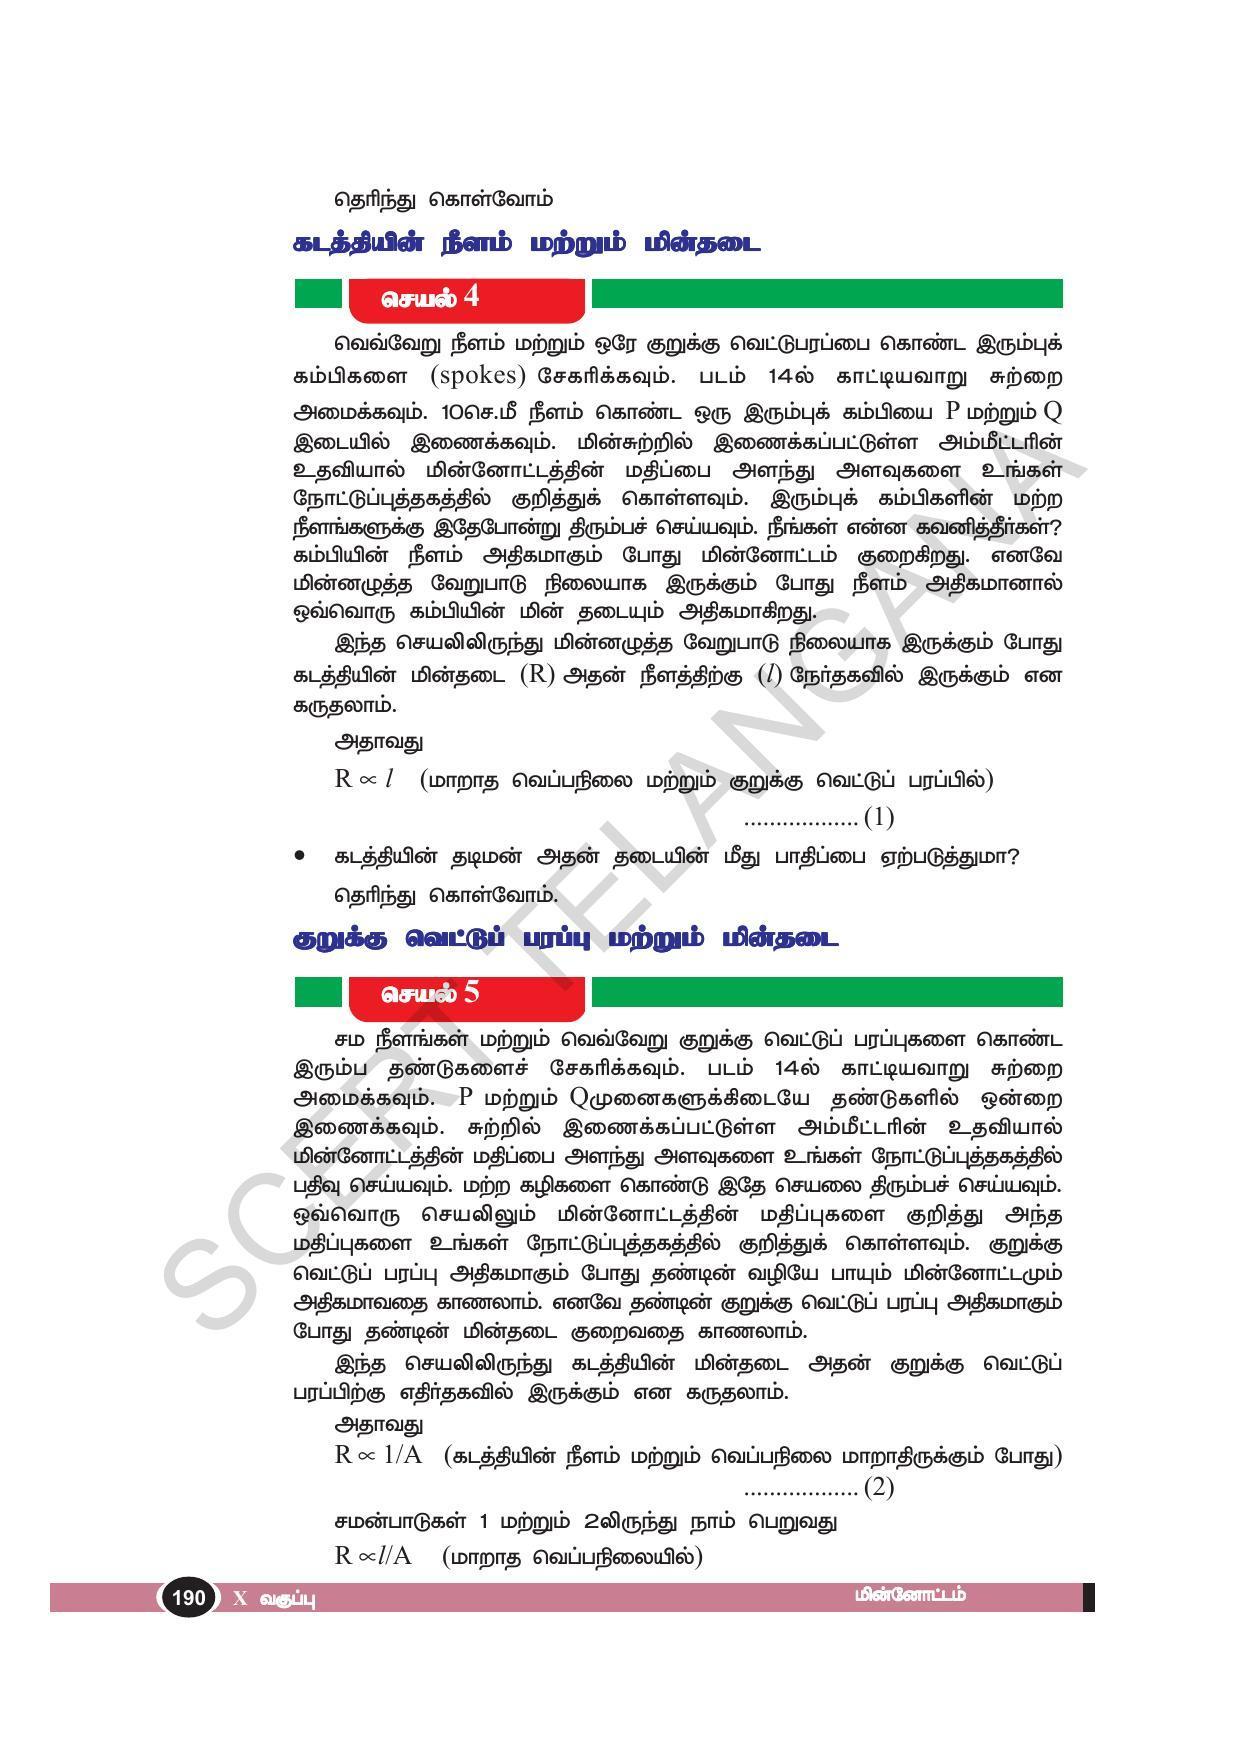 TS SCERT Class 10 Physical Science(Tamil Medium) Text Book - Page 202